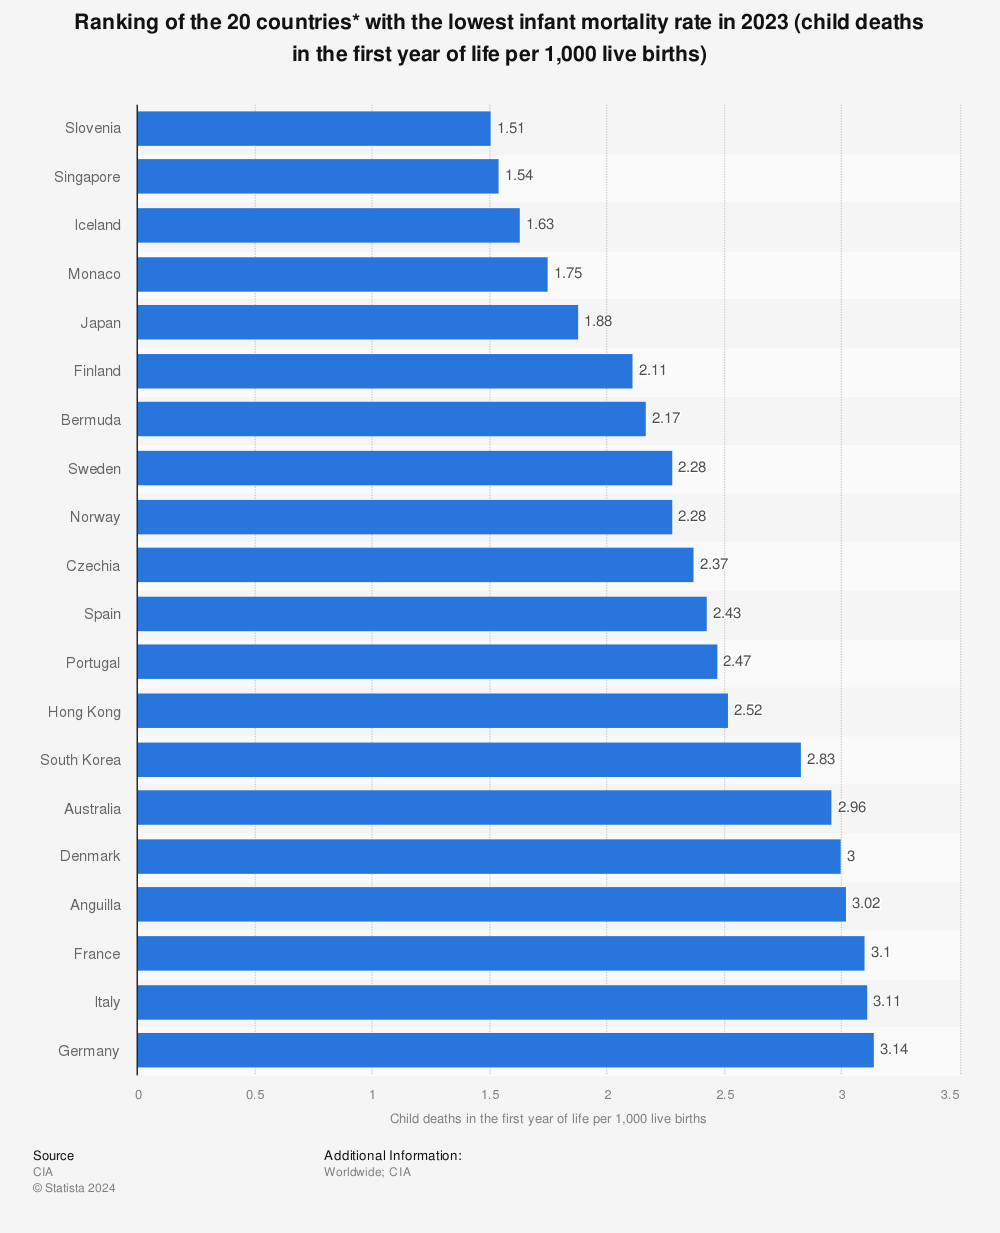 Statistic: Ranking of the 20 countries* with the lowest infant mortality rate in 2023 (child deaths in the first year of life per 1,000 live births) | Statista